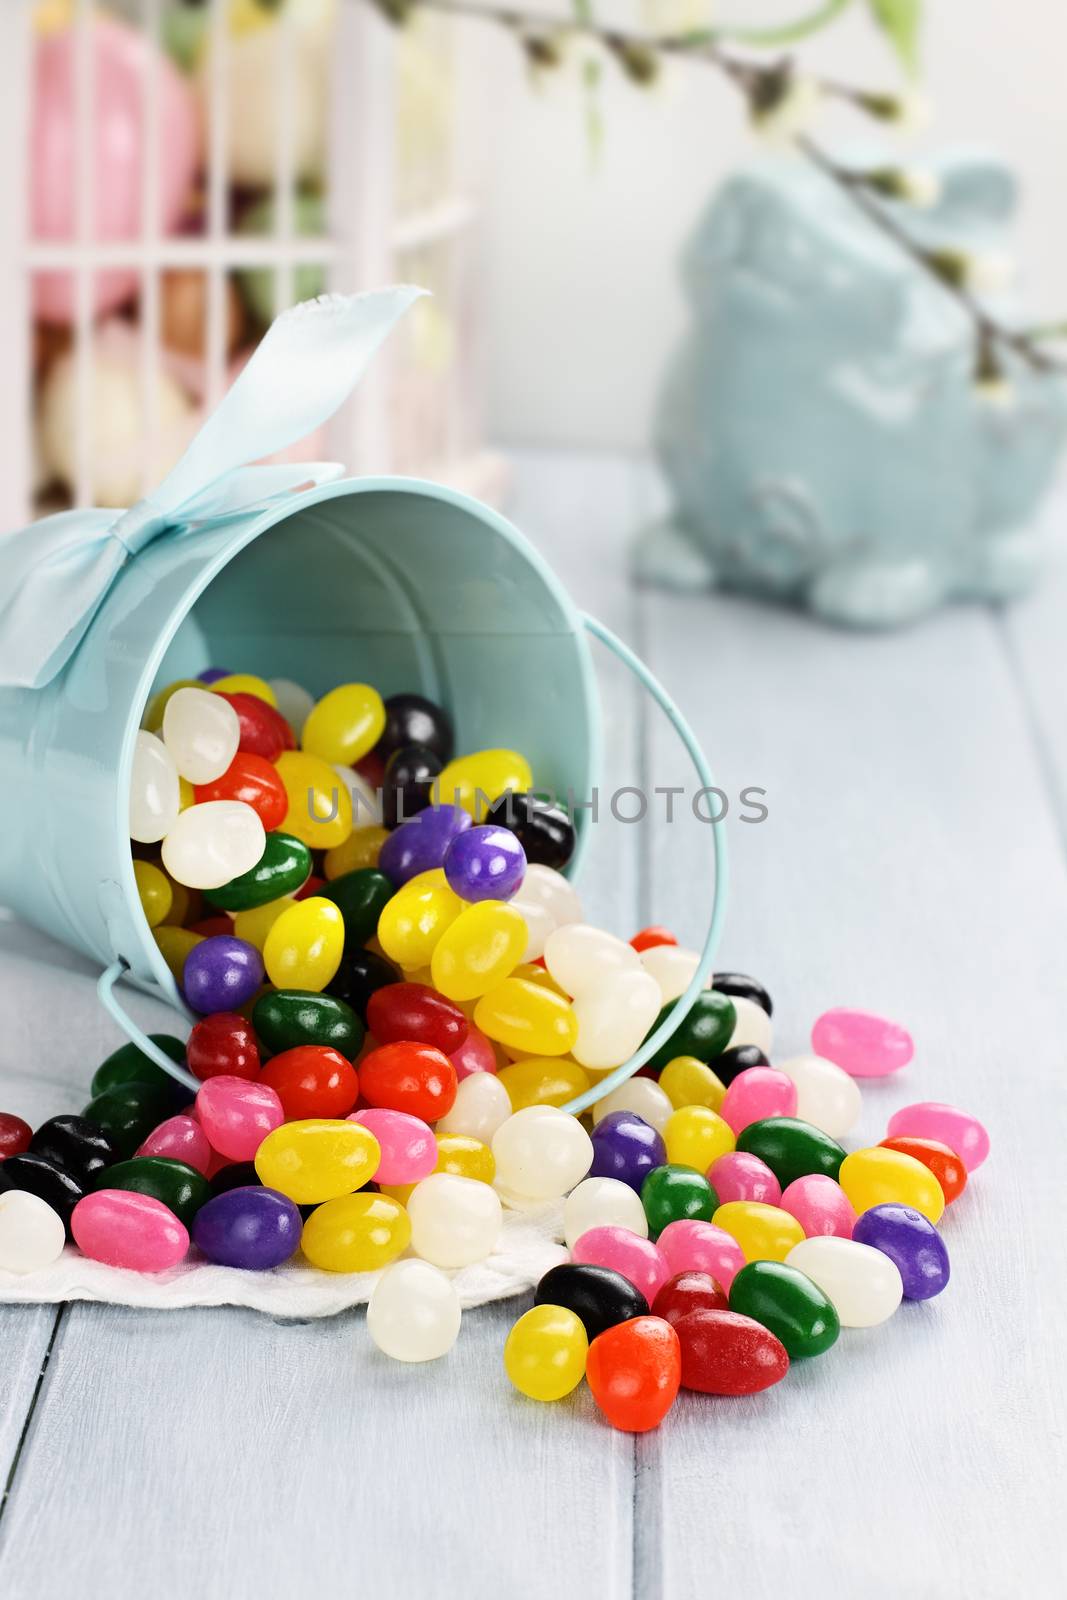 A blue tin bucket tipped over, spilling jelly beans onto a table. Shallow depth of field.